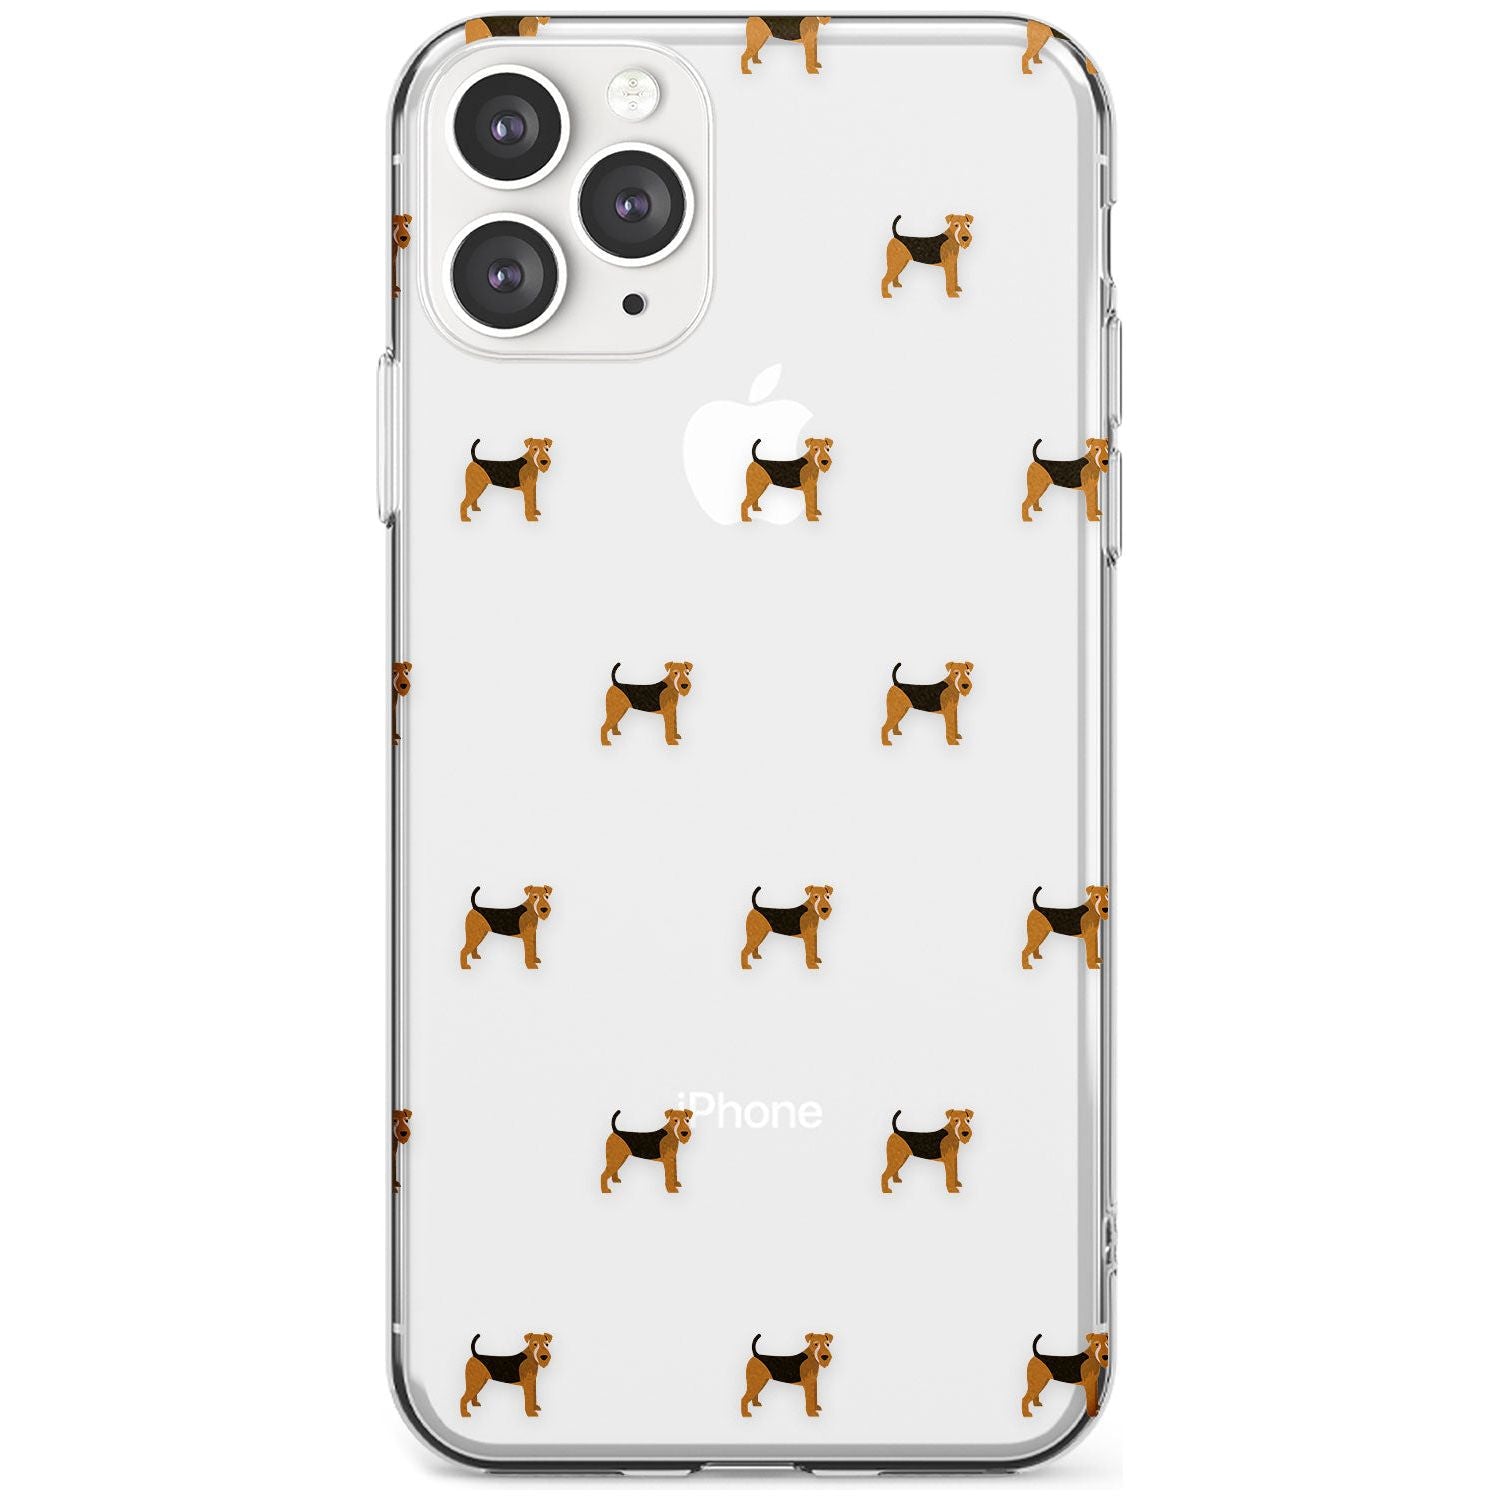 Airedale Terrier Dog Pattern Clear Slim TPU Phone Case for iPhone 11 Pro Max